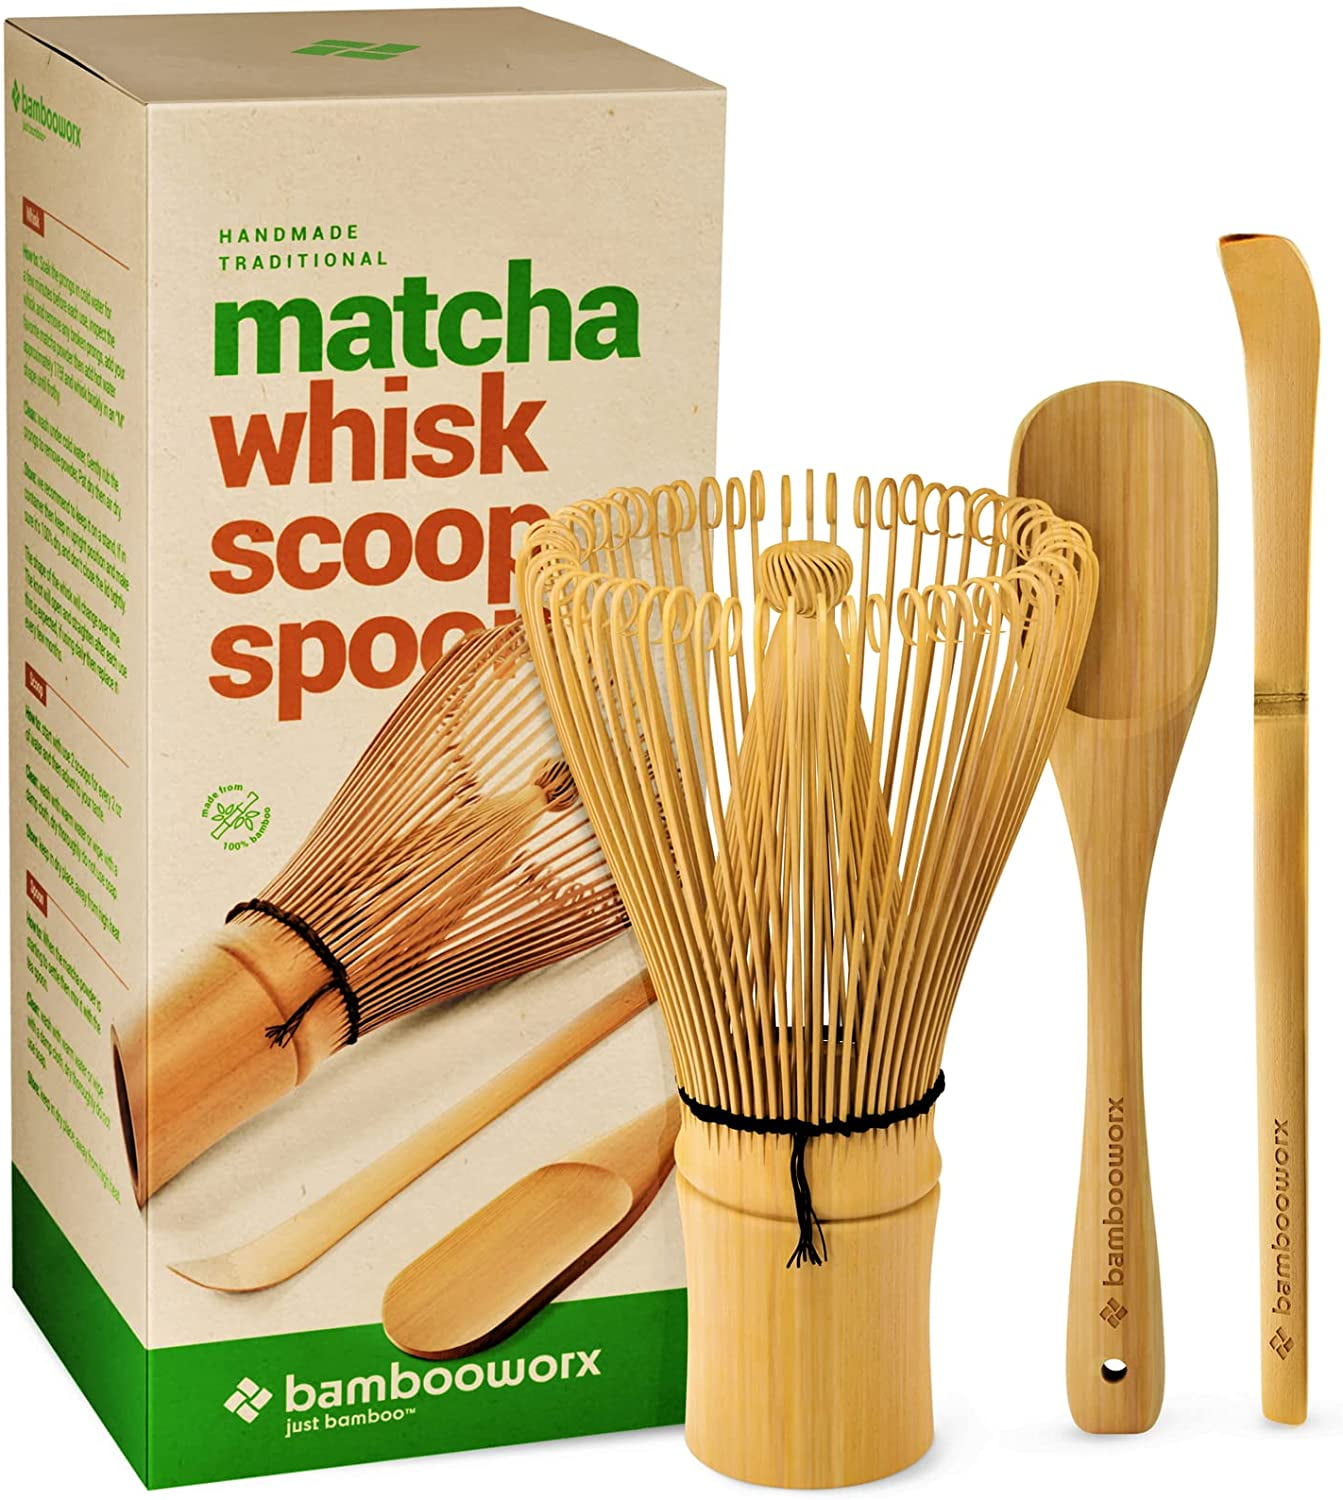 Japanese Matcha Tool Set Bamboo Scoop,Bamboo Spoon,Bamboo Whisk,Ceramic  Whisk Holder Fit for Tea Ceremony Use (Black)